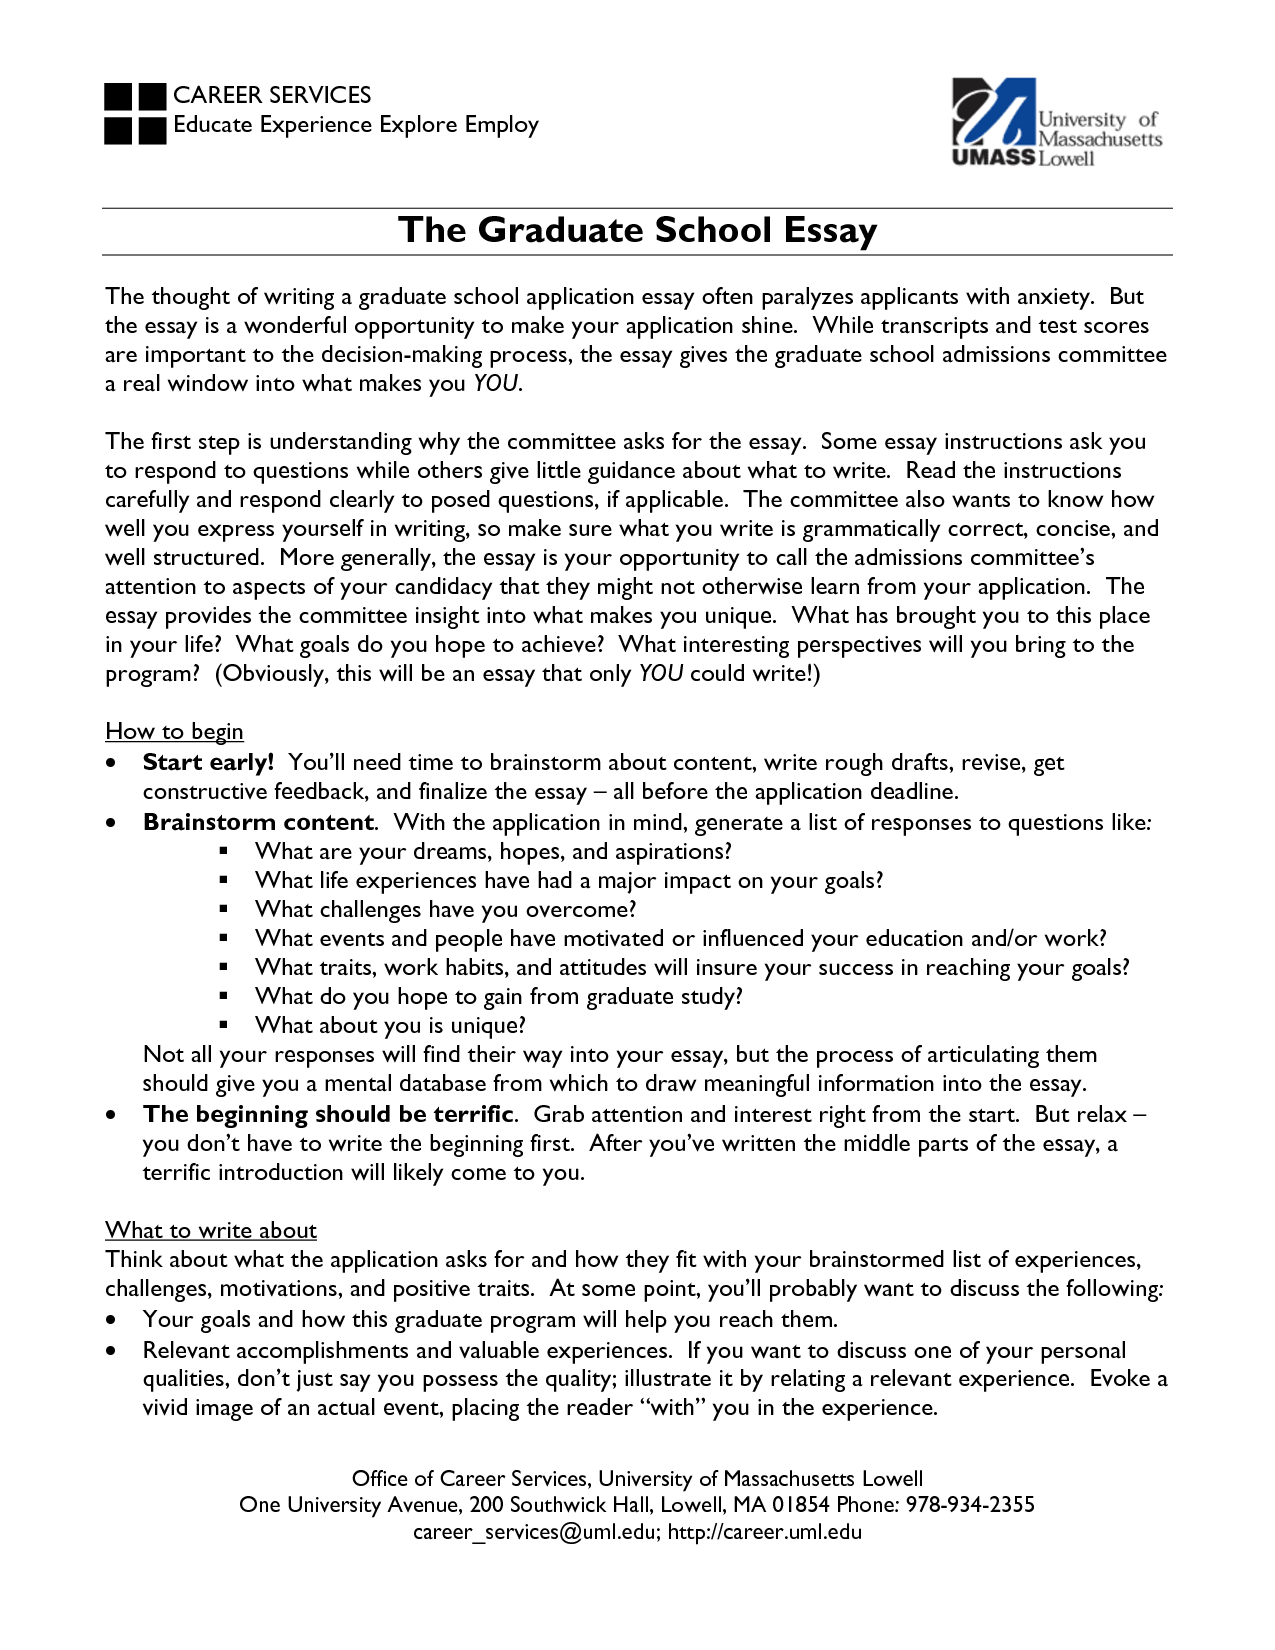 Personal essay for graduate school application how to write